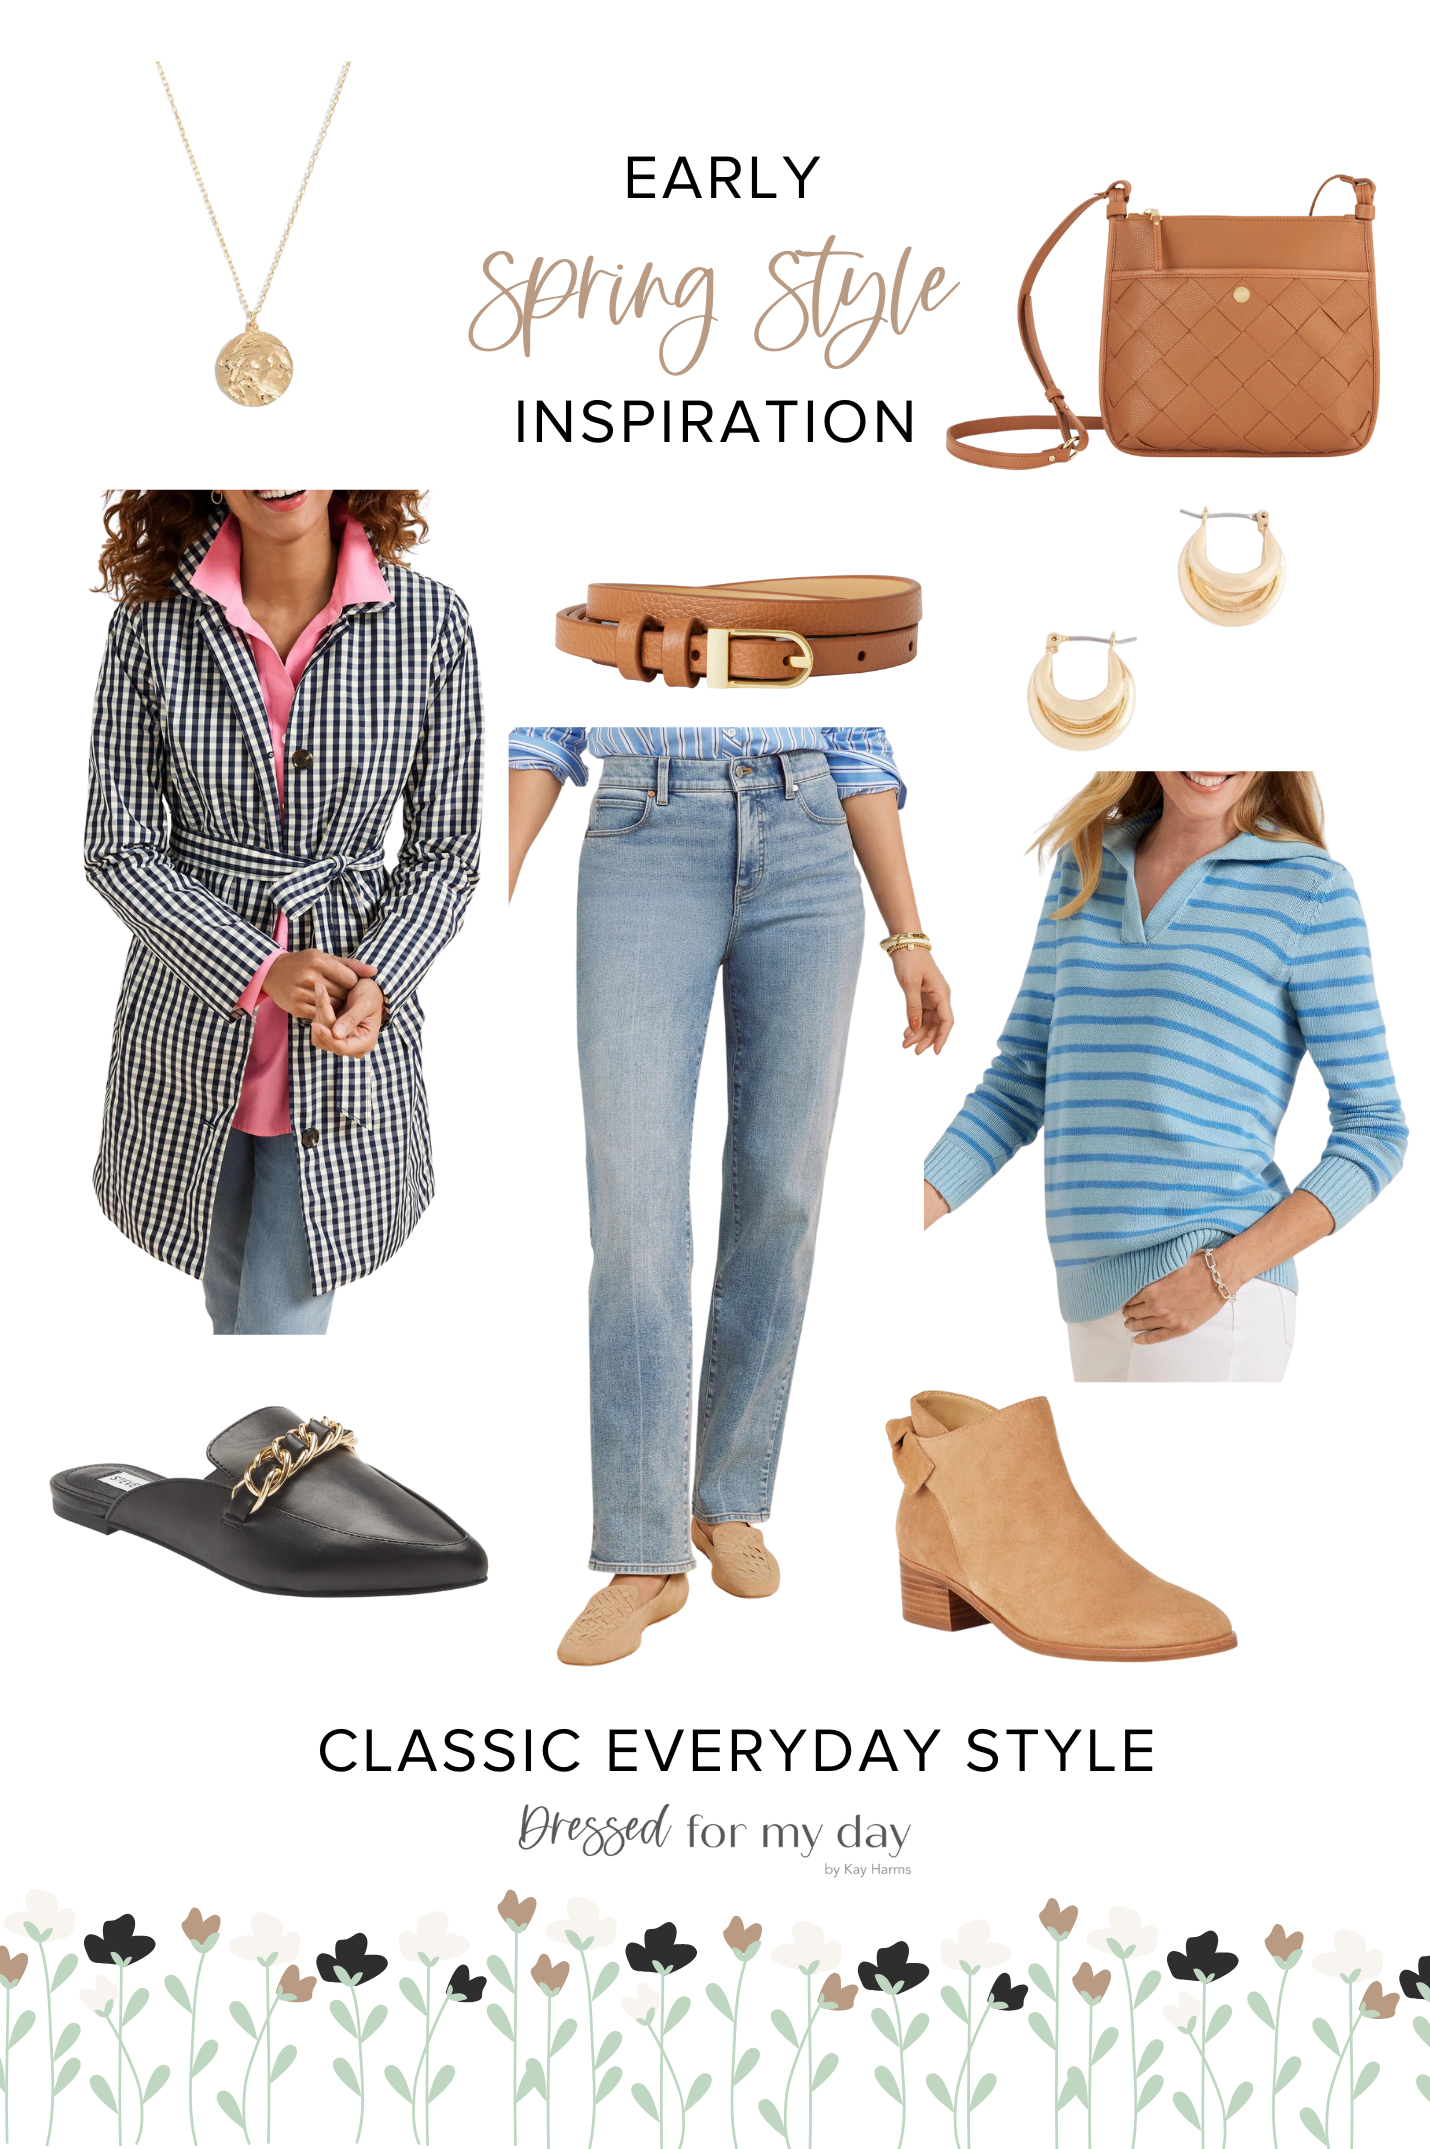 Early Spring Style Inspiration from Talbots